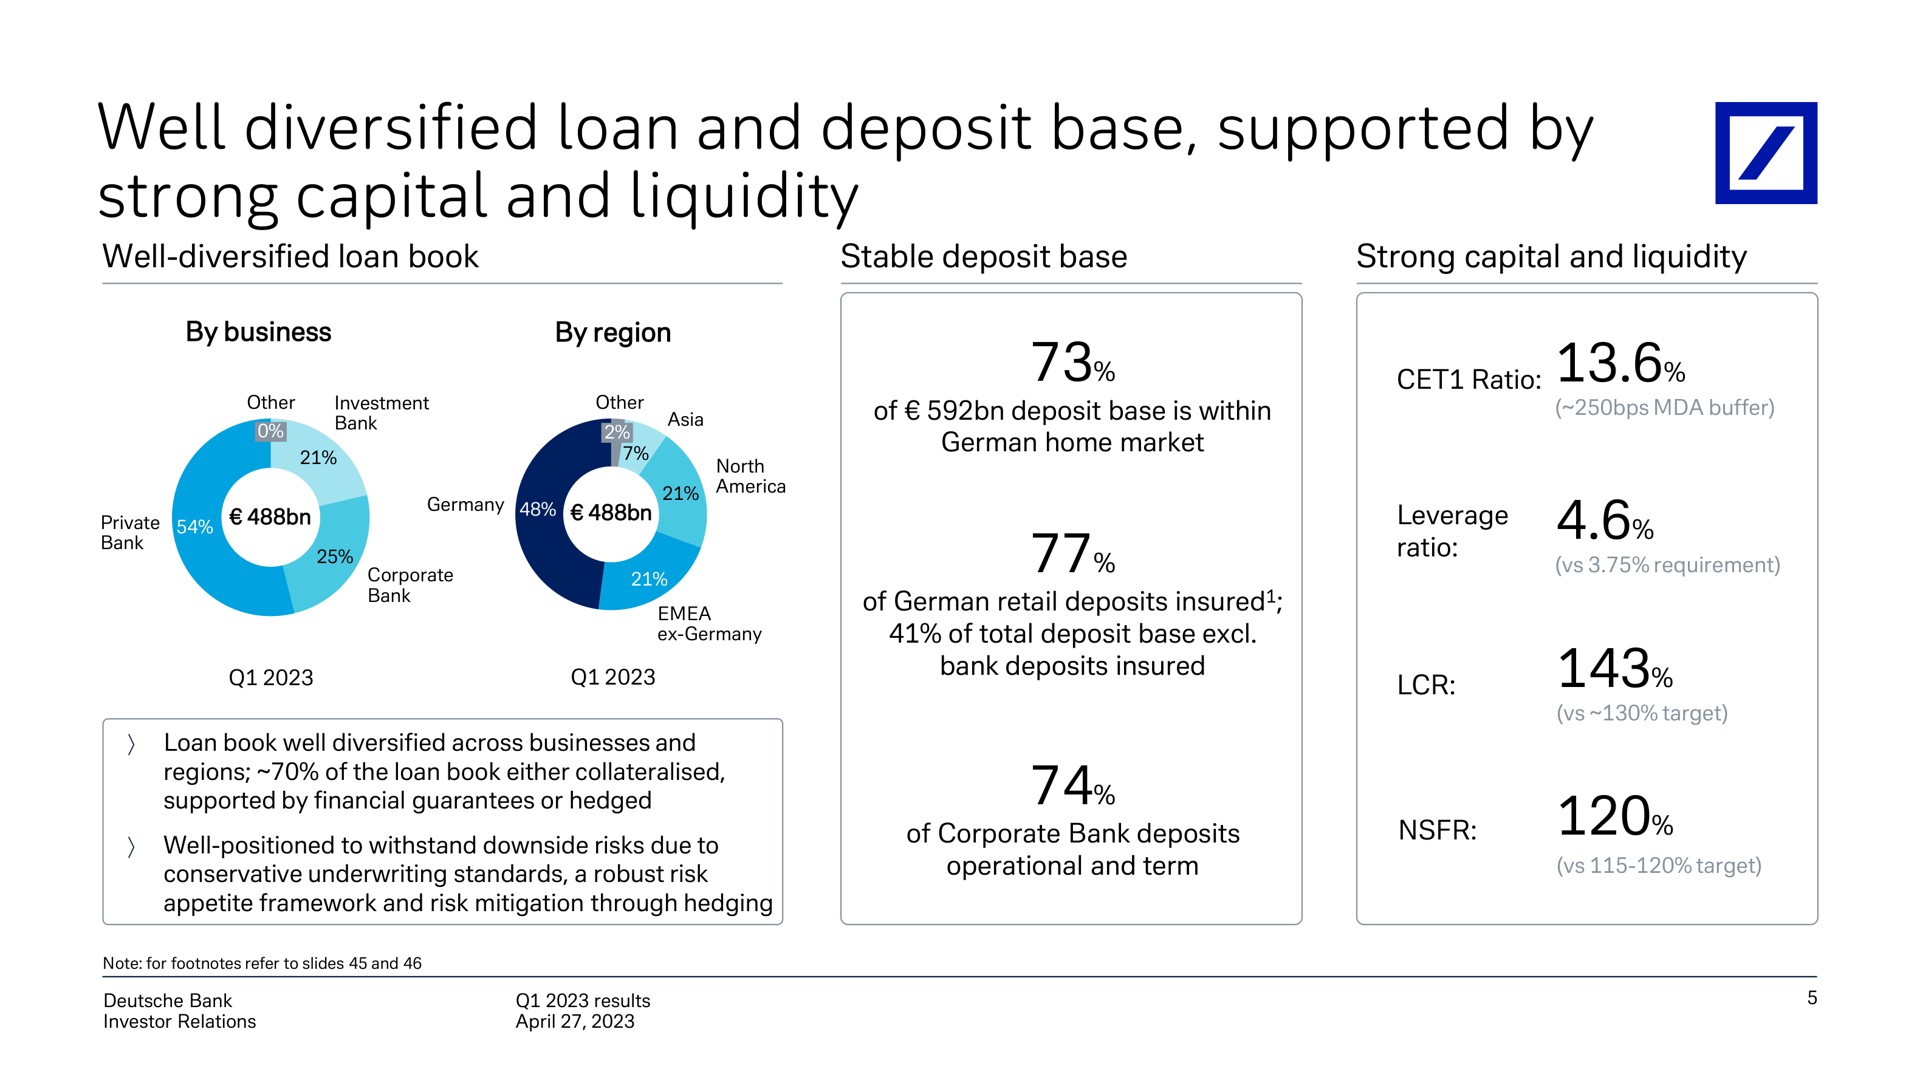 well diversified loan and deposit base supported by strong capital and liquidity | Deutsche Bank